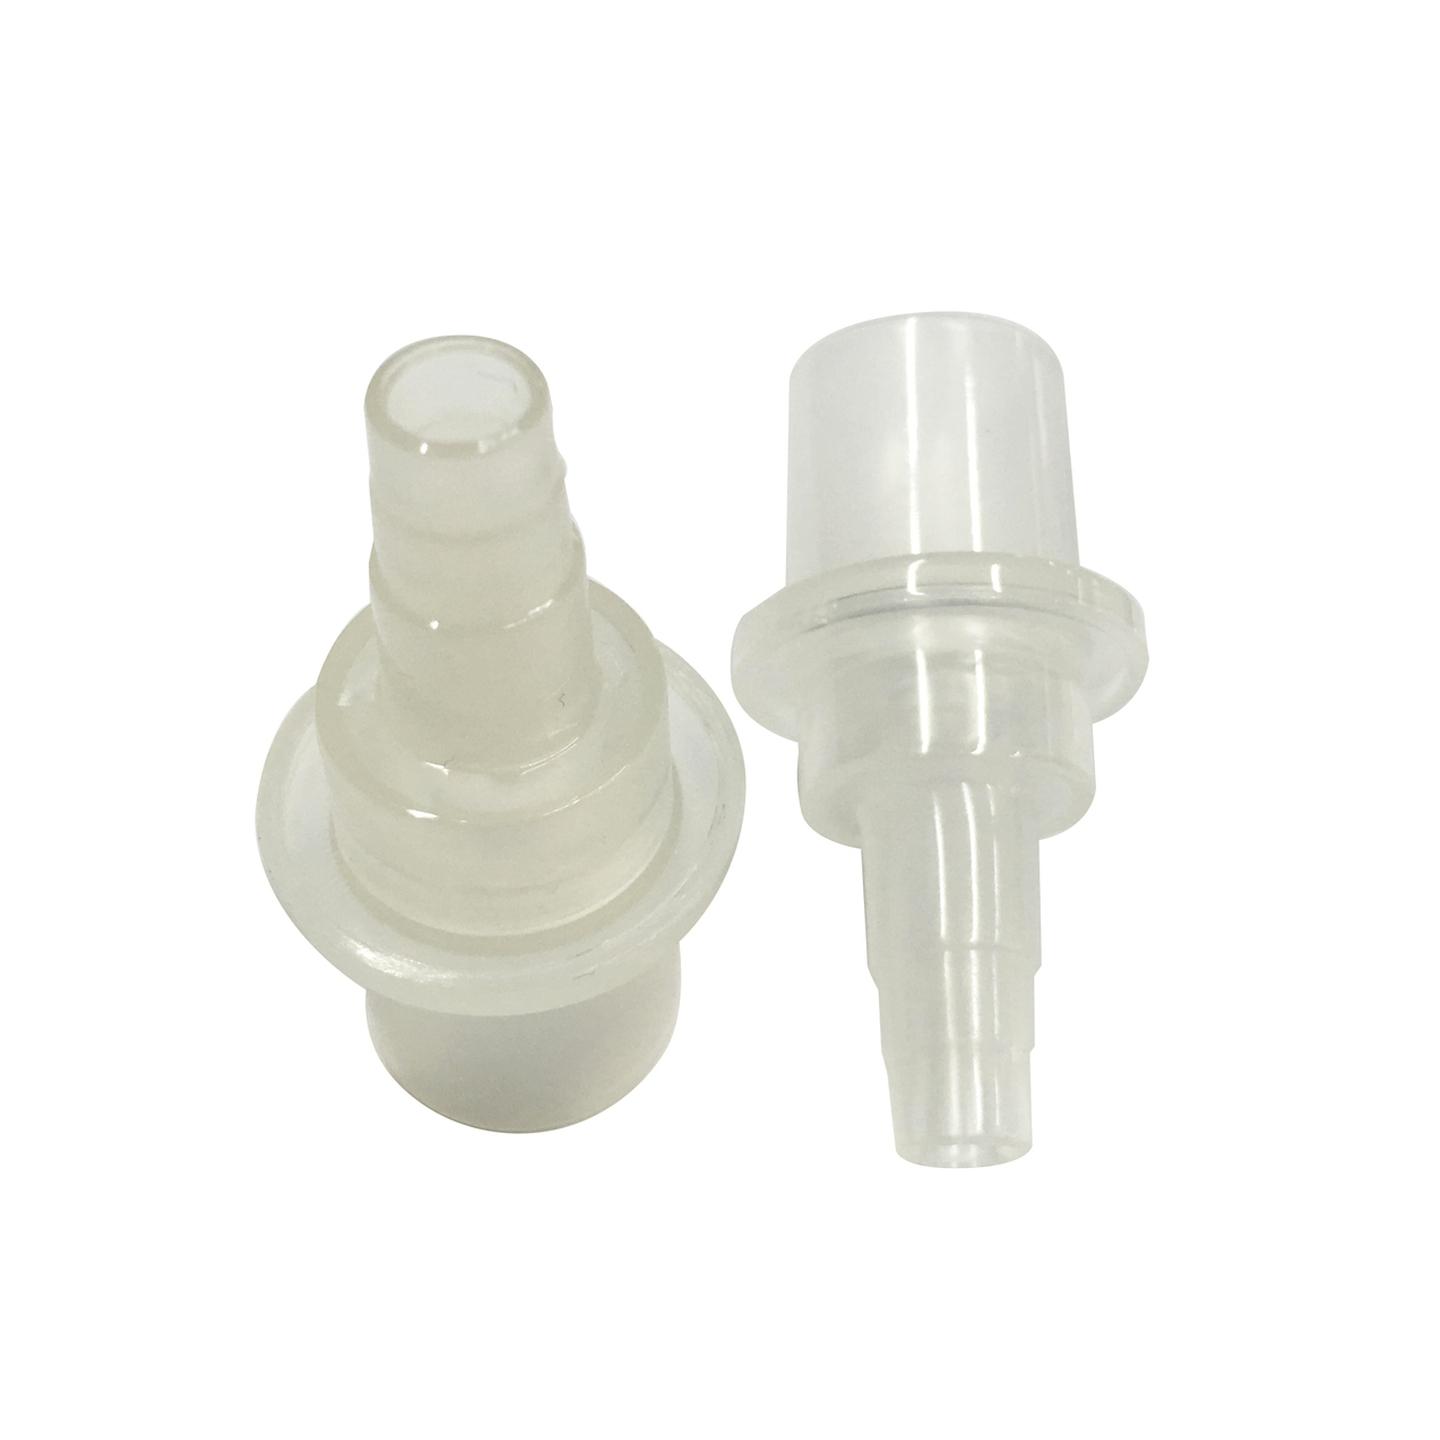 Spare Alcohol Breath Tester Mouthpieces - Pack of 10